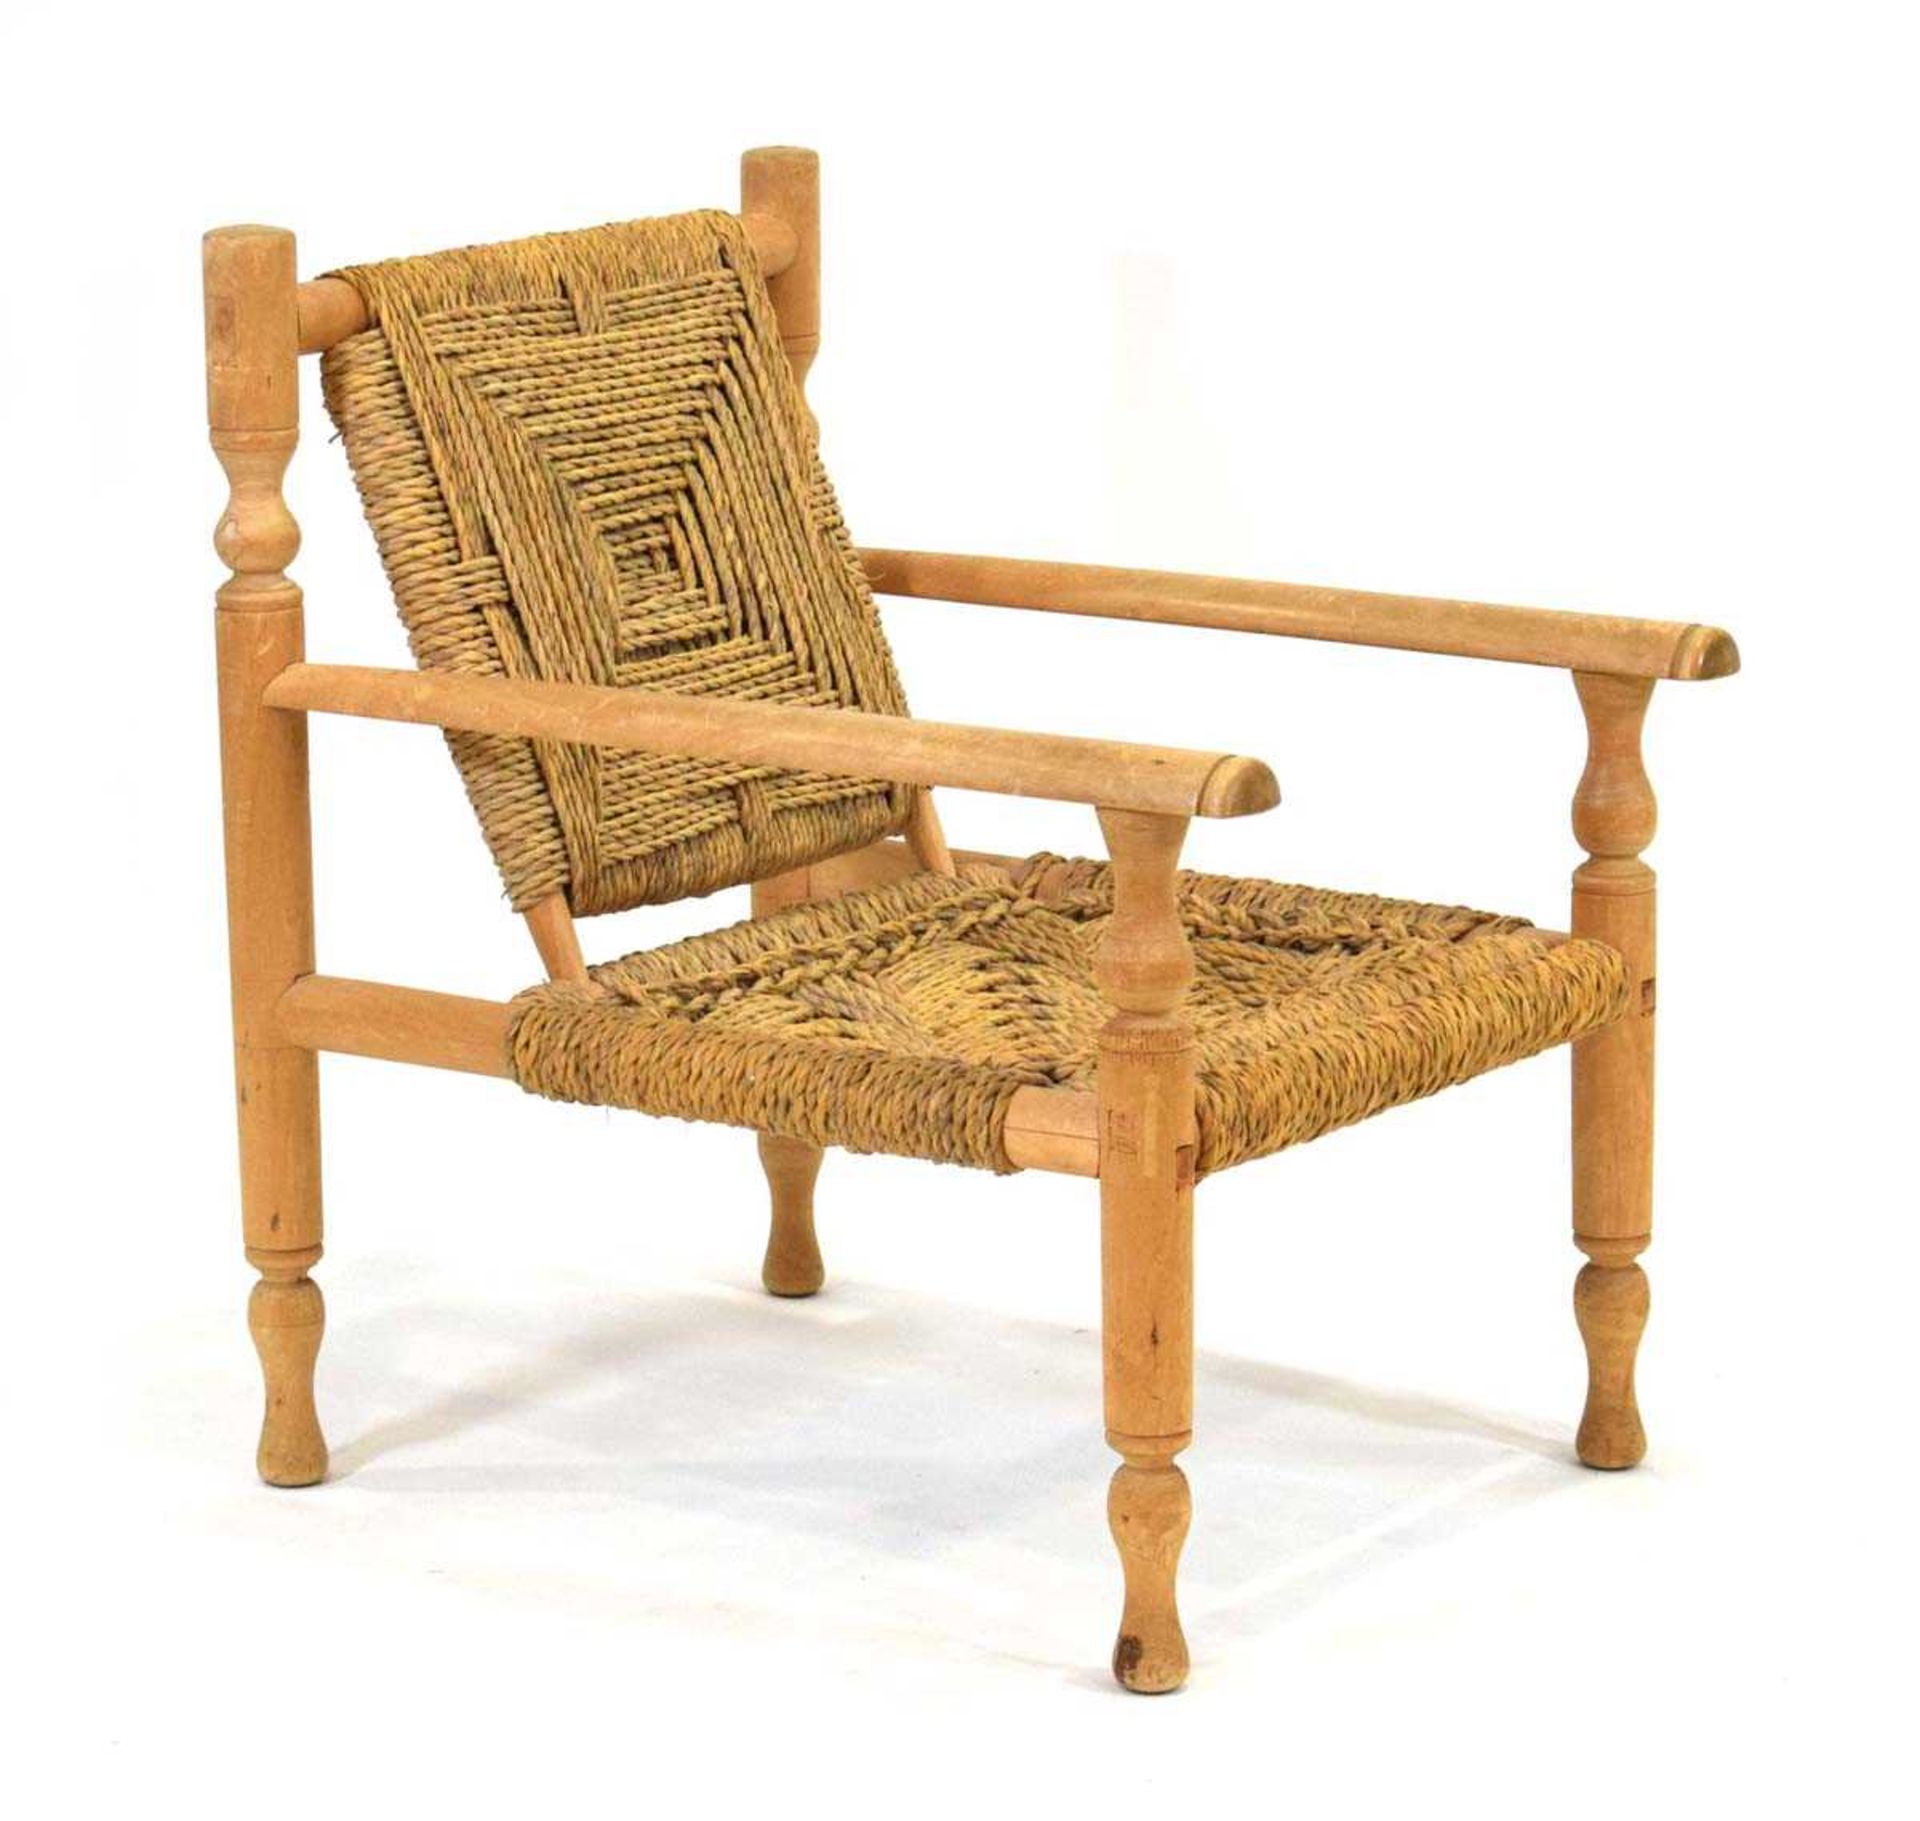 Attributed to Adrian Audoux and Frida Minet, a French beech armchair wrapped with abaca rope